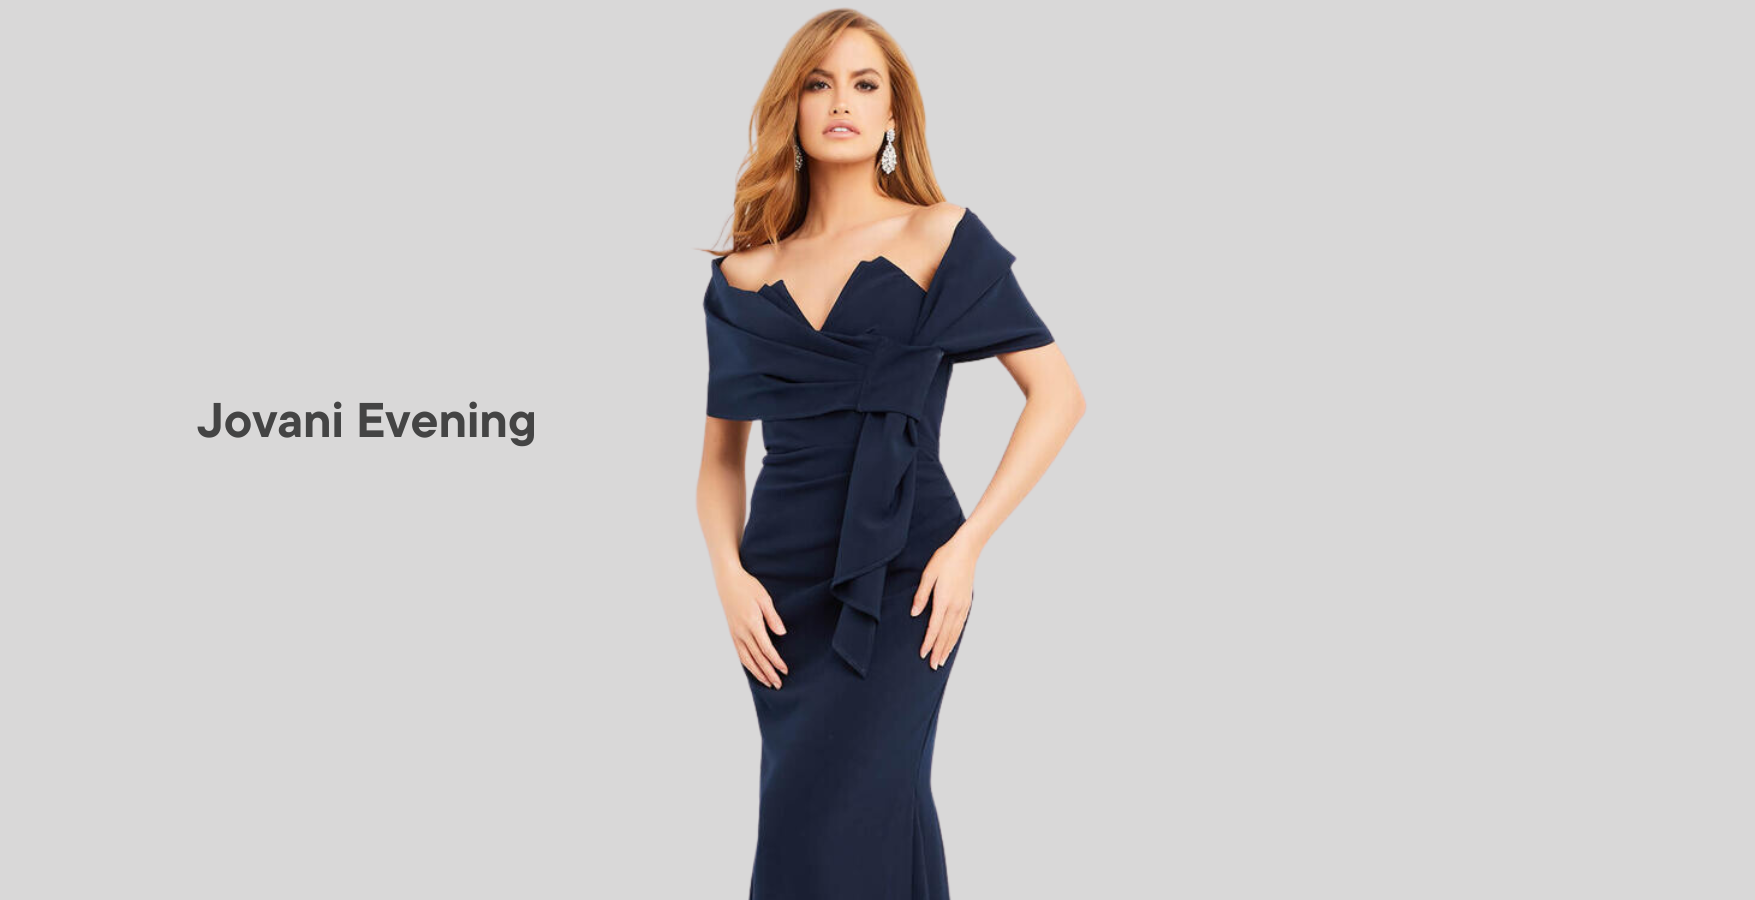 female wearing navy dress with pleats and text 'Jovani Evening' on the left